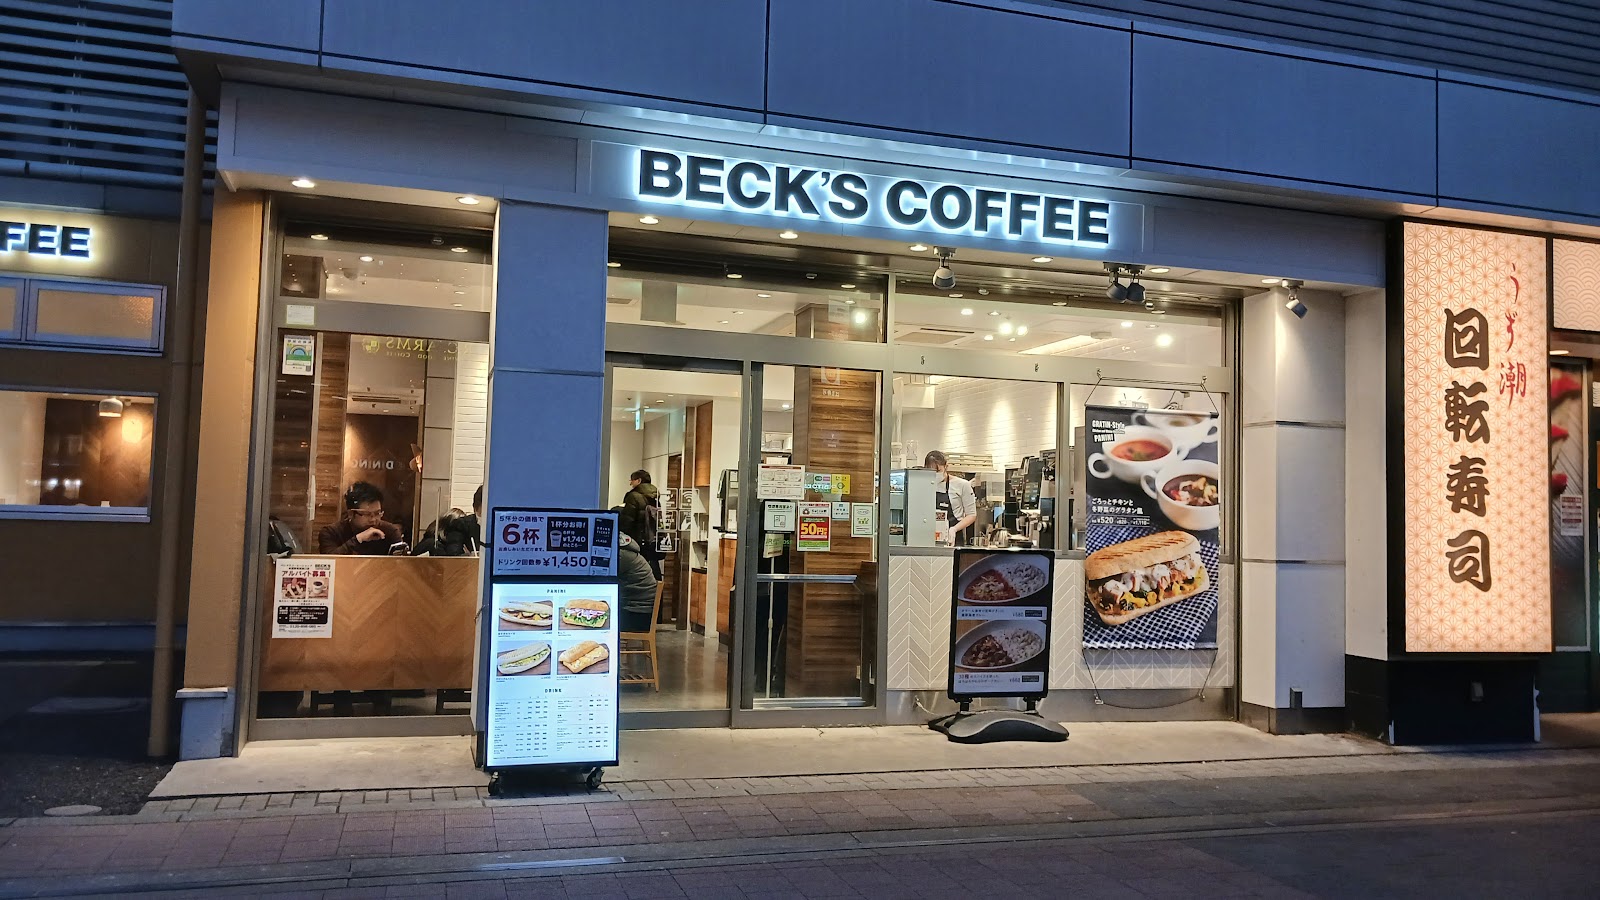 BECK'S COFFEE SHOP 秋葉原電気街口店にて